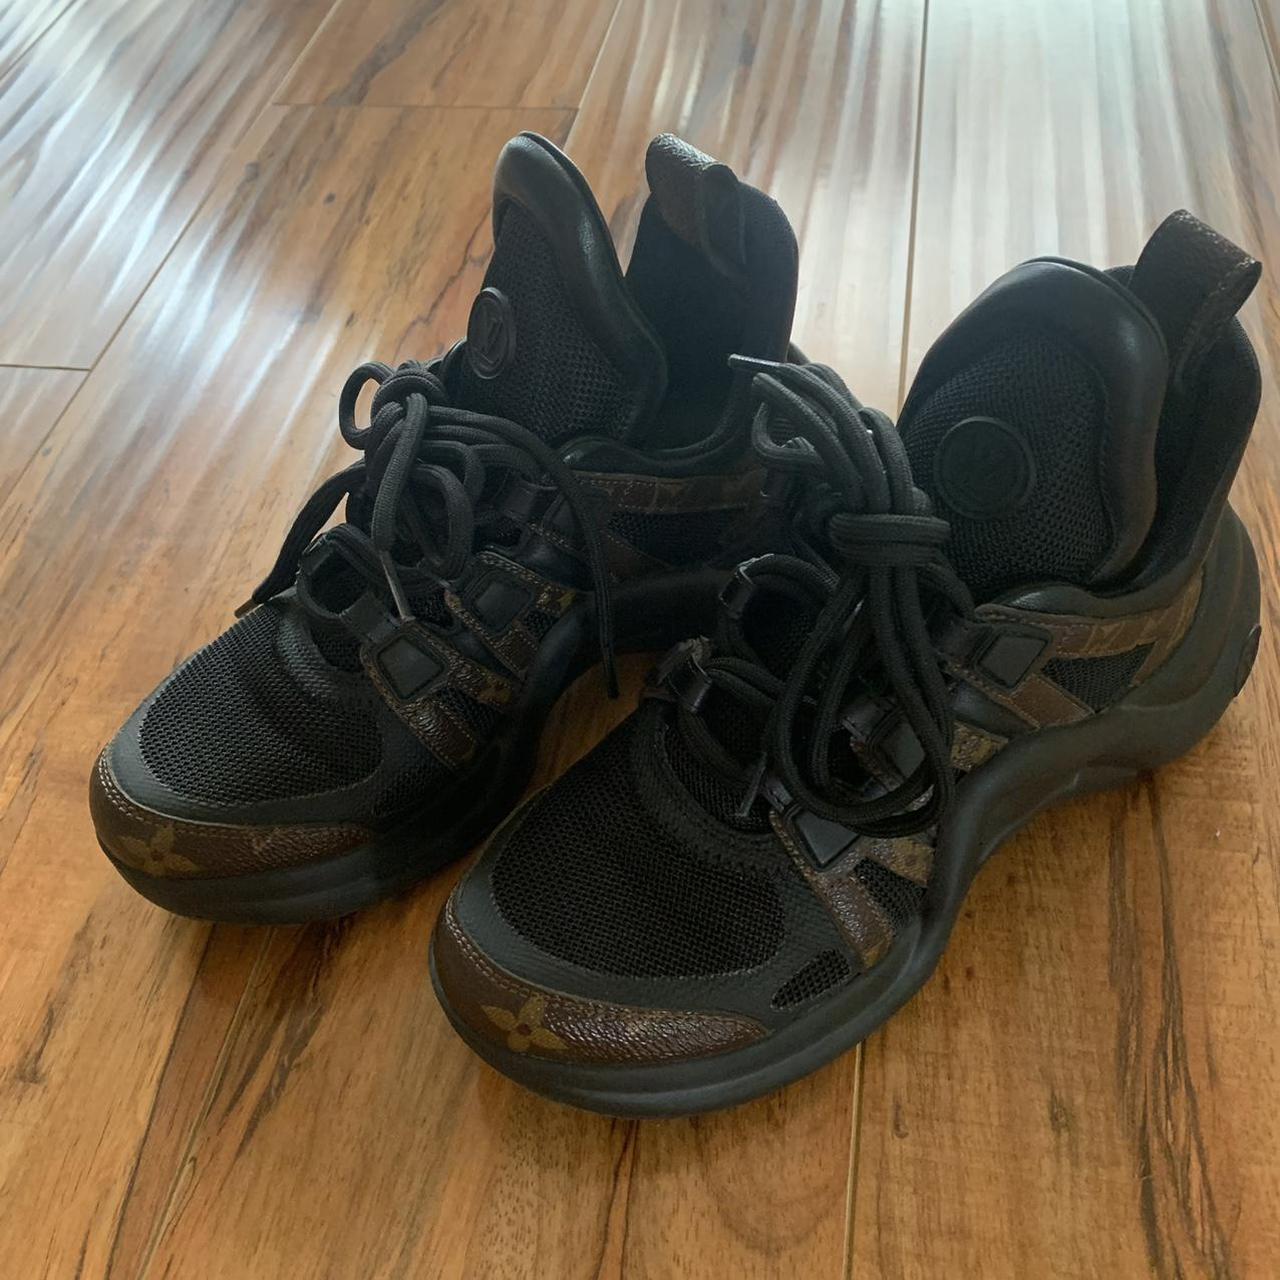 marine lv skate sneakers bought from saks off 5th - Depop